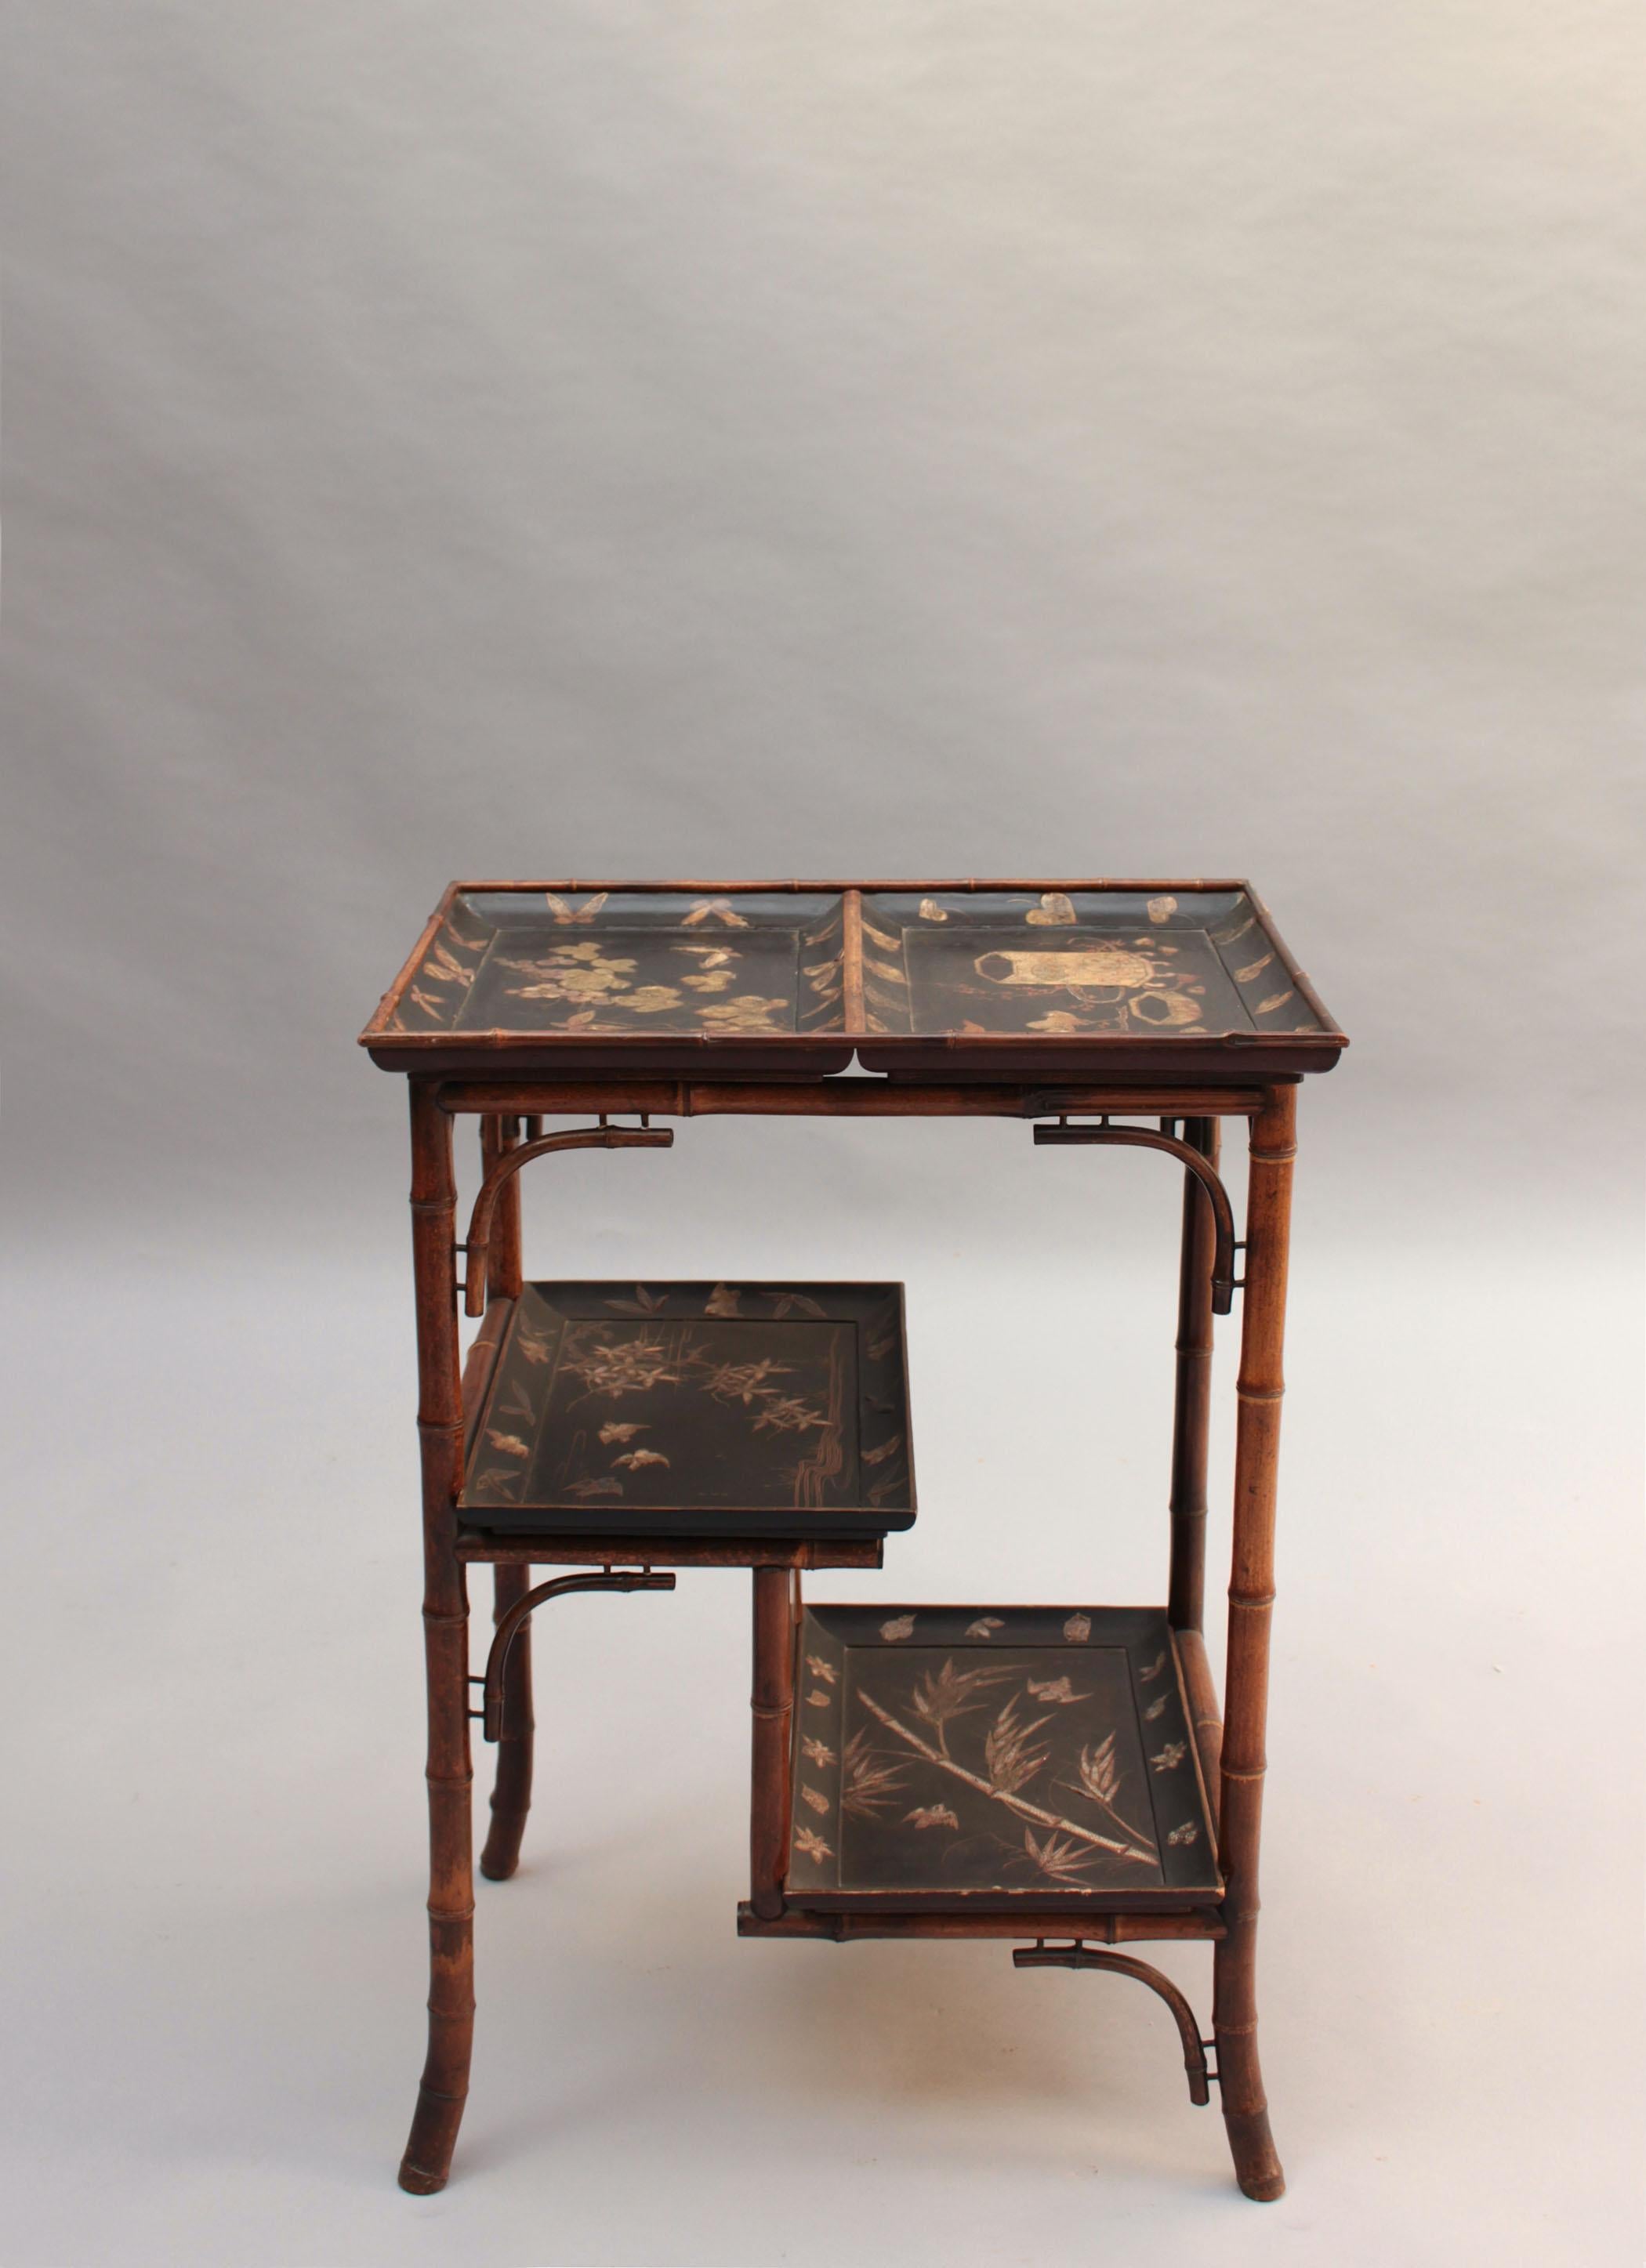 Fine French Japonisme Lacquered Side Table with Shagreen Inlays For Sale 5